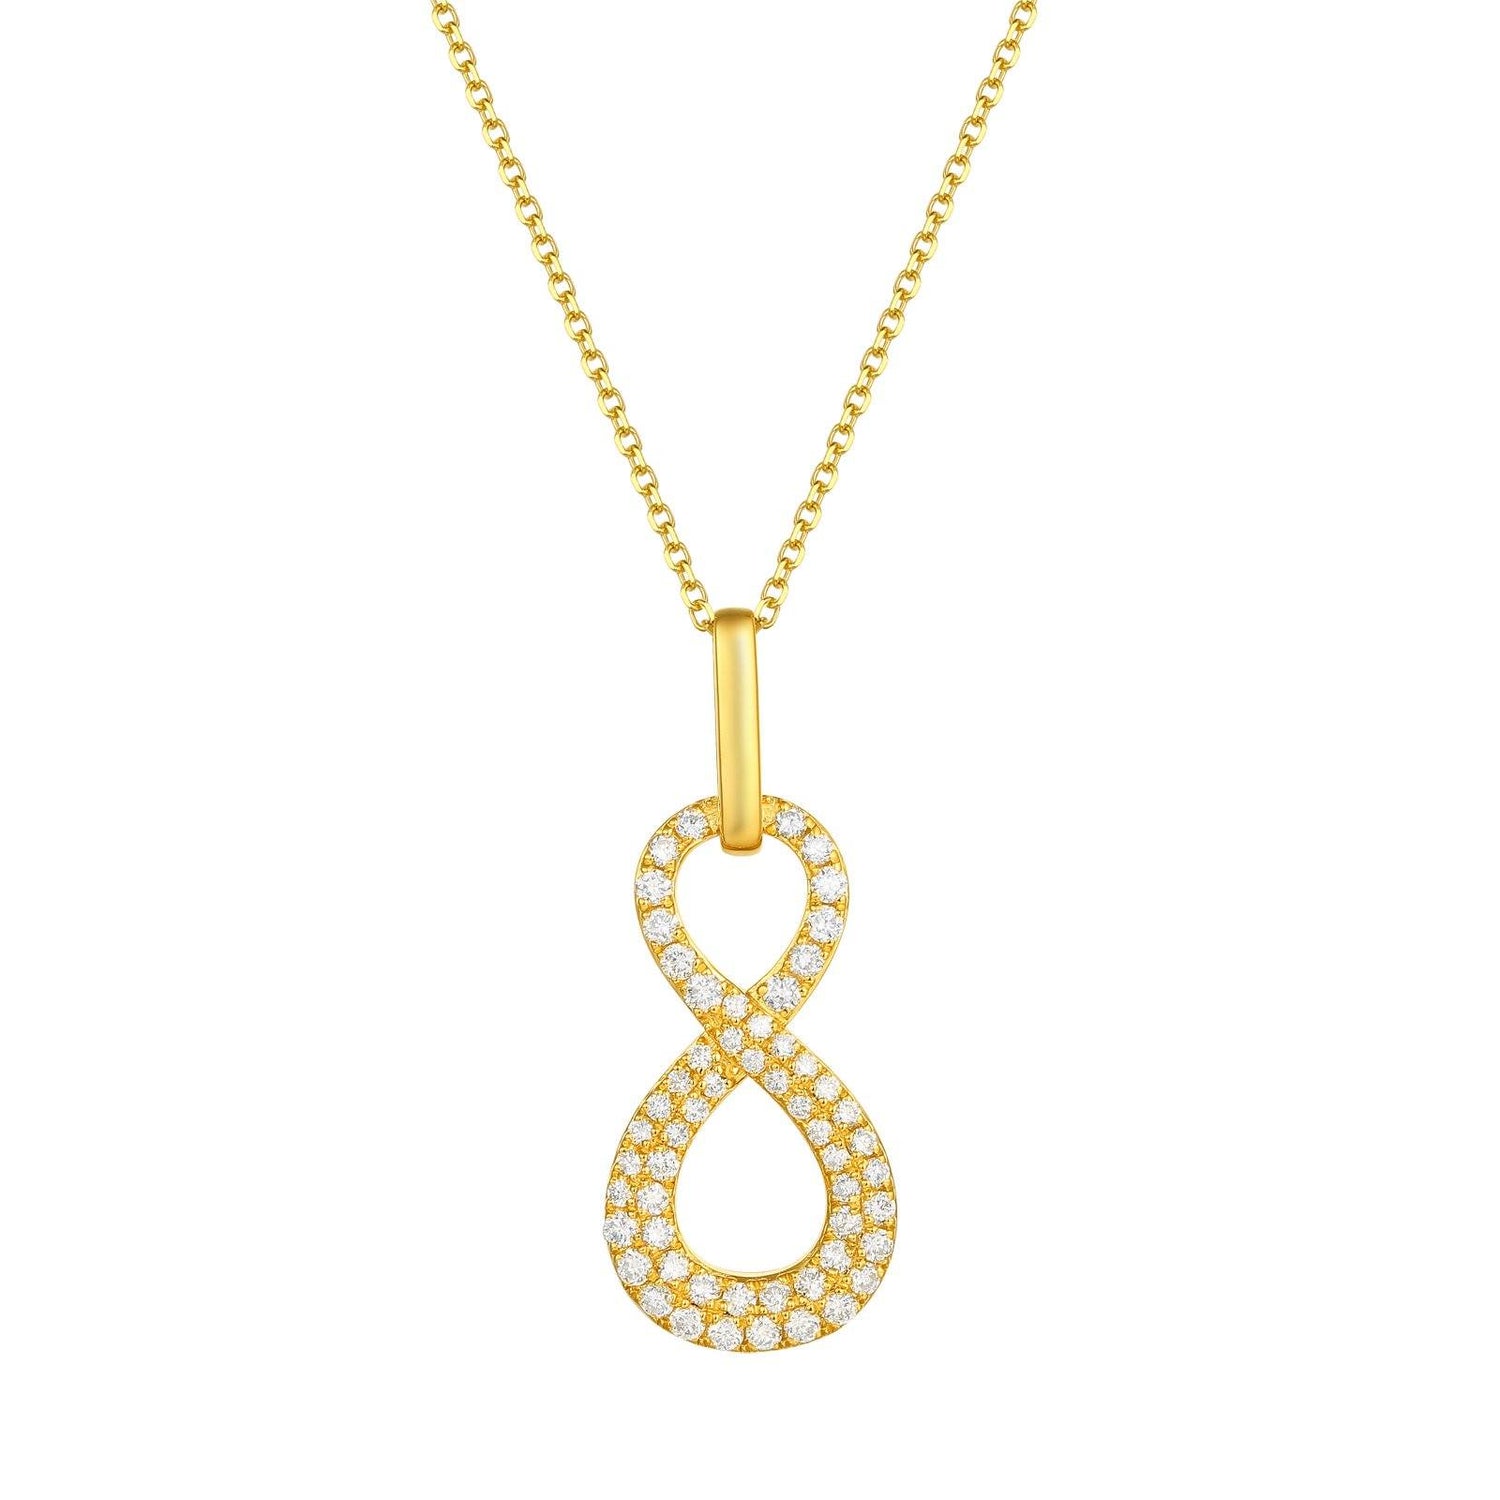 Limitless Collection Lab Grown Diamond Pendant Necklace Analucia Beltran Diamonds 14 kt yellow gold plated